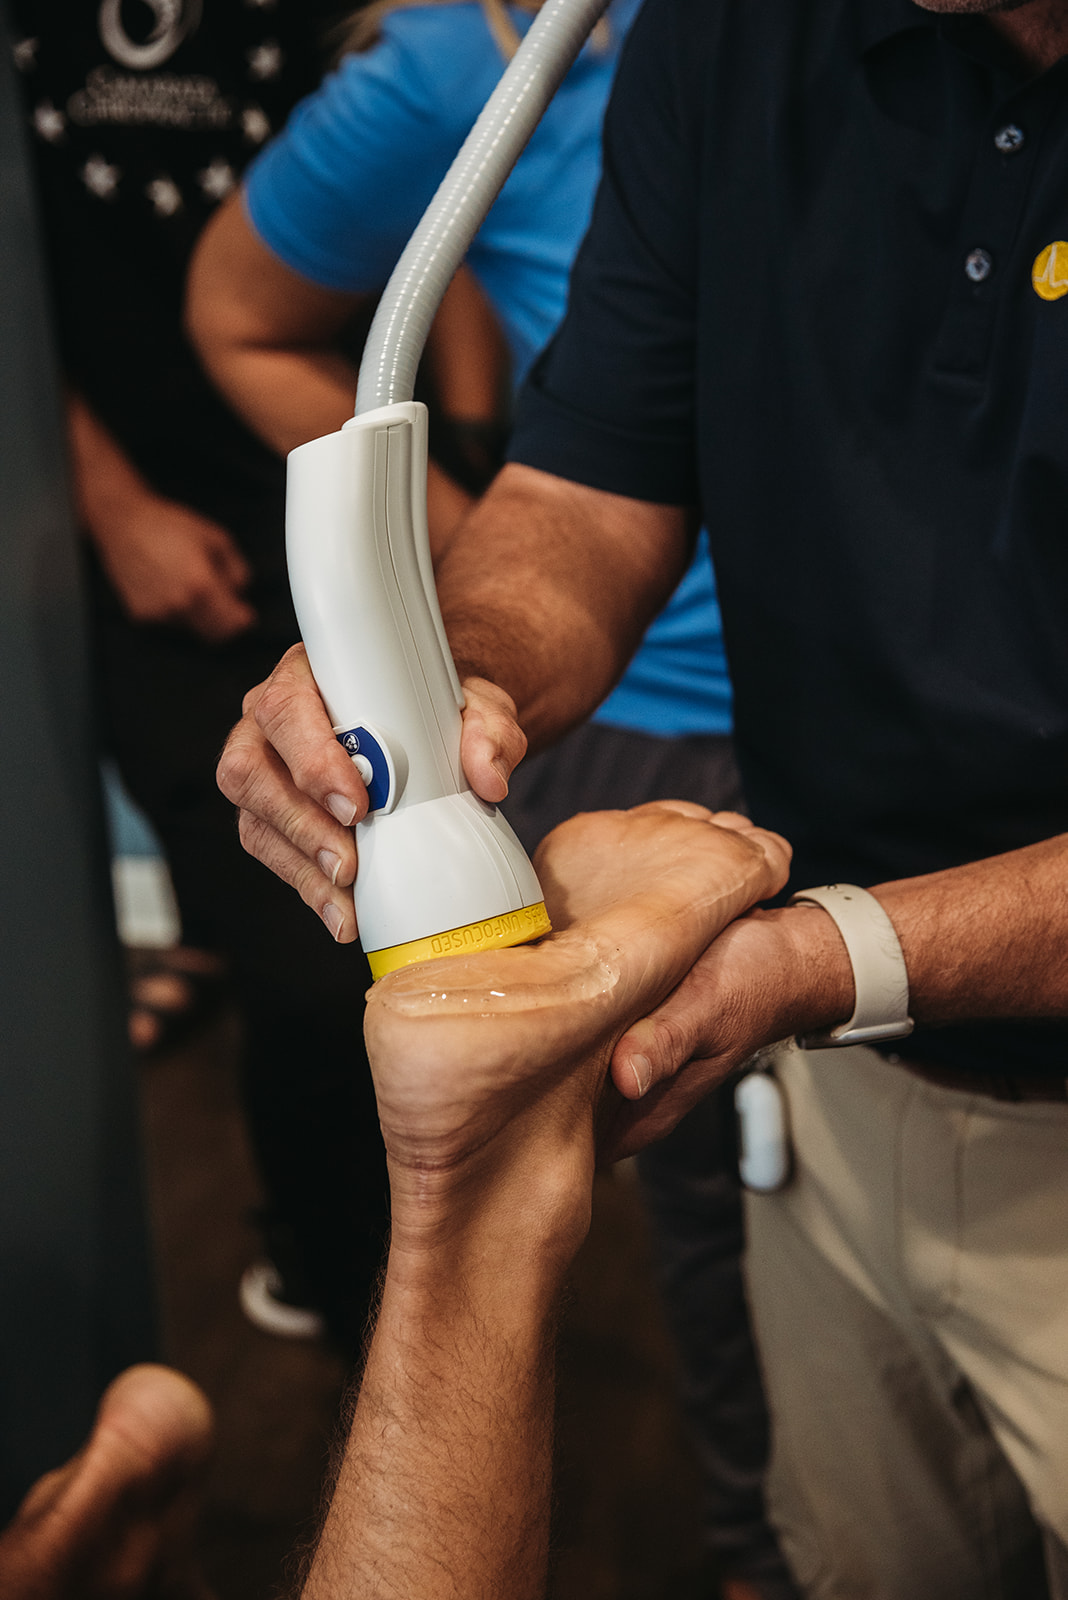 Choosing the Best Treatment: How SoftWave Therapy Surpasses Laser Therapy for Musculoskeletal Issues